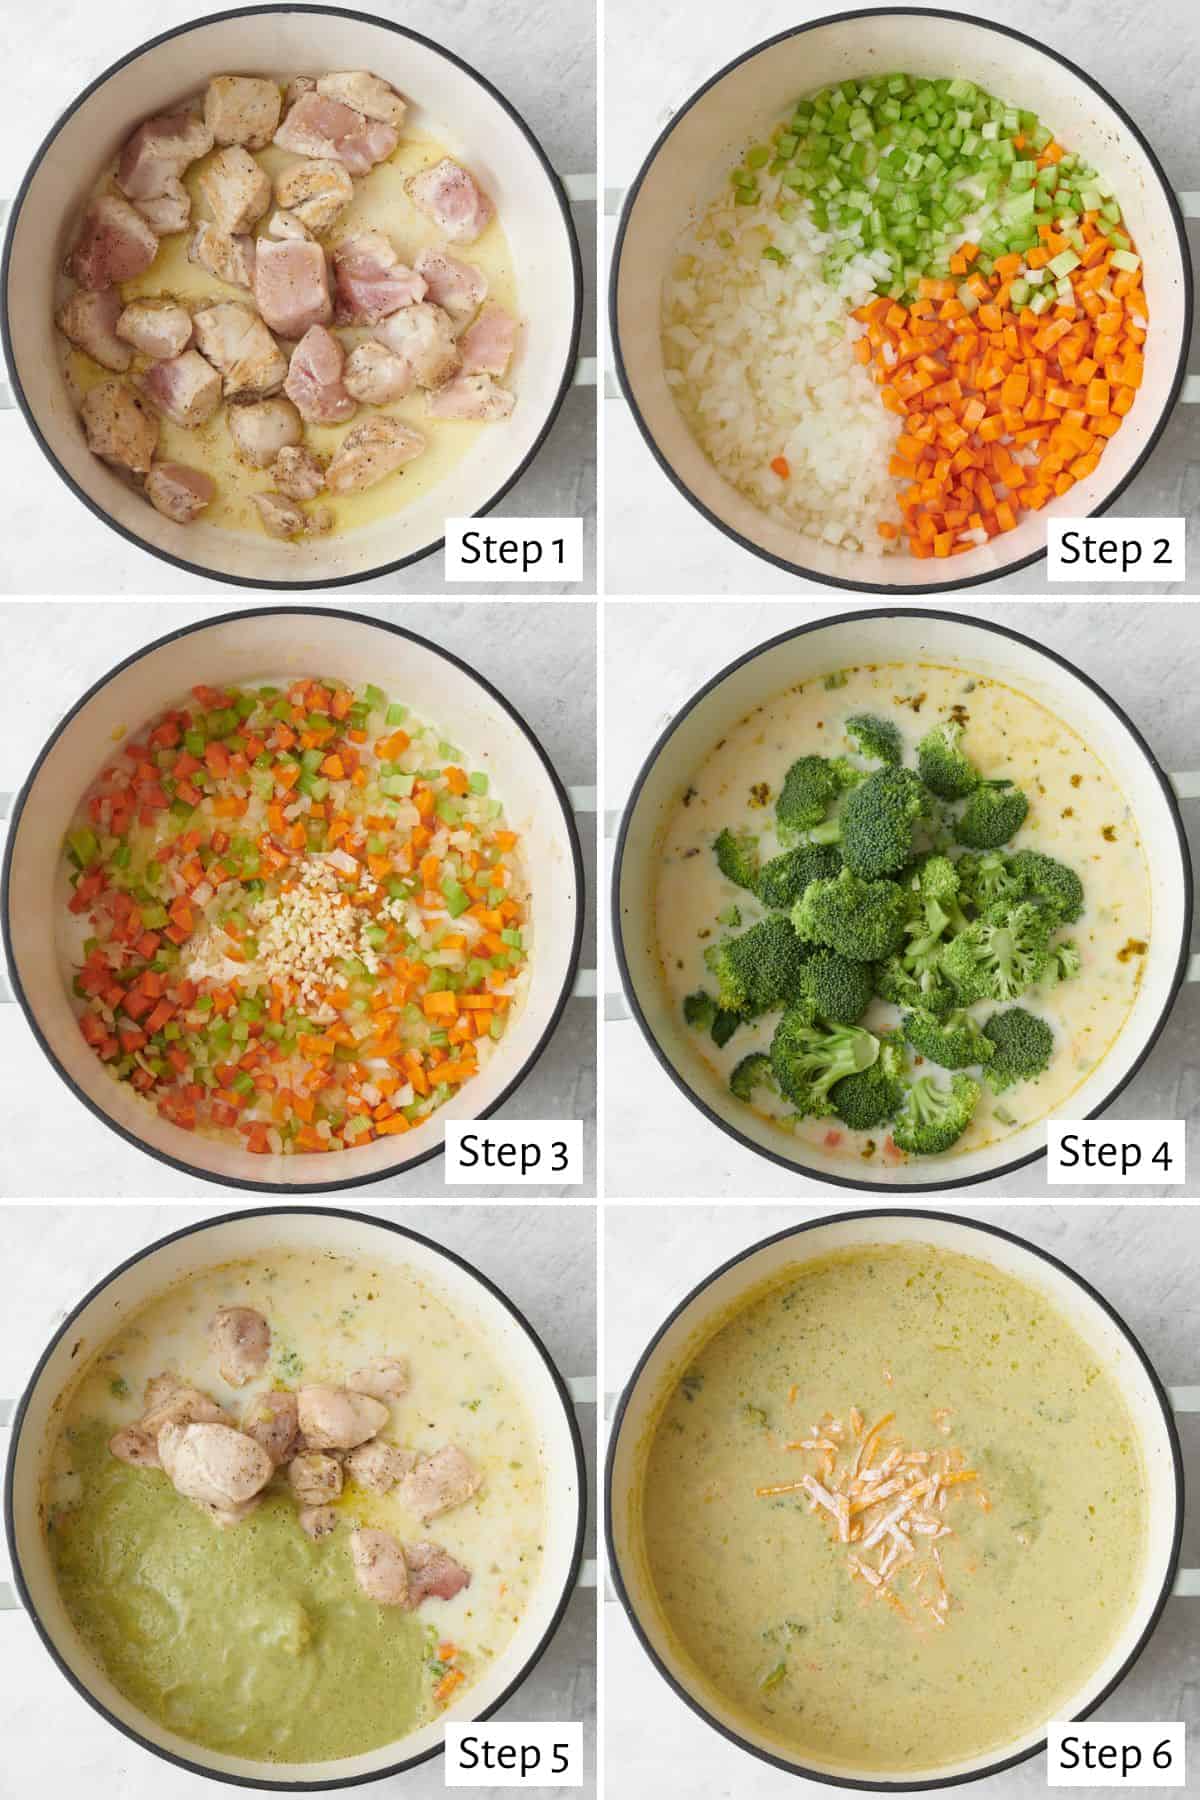 6 image collage making recipe: 1- diced chicken pieces in a pot with oil, partially cooked, 2- chicken removed with chopped onions, celery, and carrots added, 3- after cooking veggies with garlic and seasonings added, 4- after adding liquid with fresh broccoli florets added, 5- soup after blending broccoli into a smooth creamy sauce and chicken pieces added, 6- final soup with shredded cheese added.